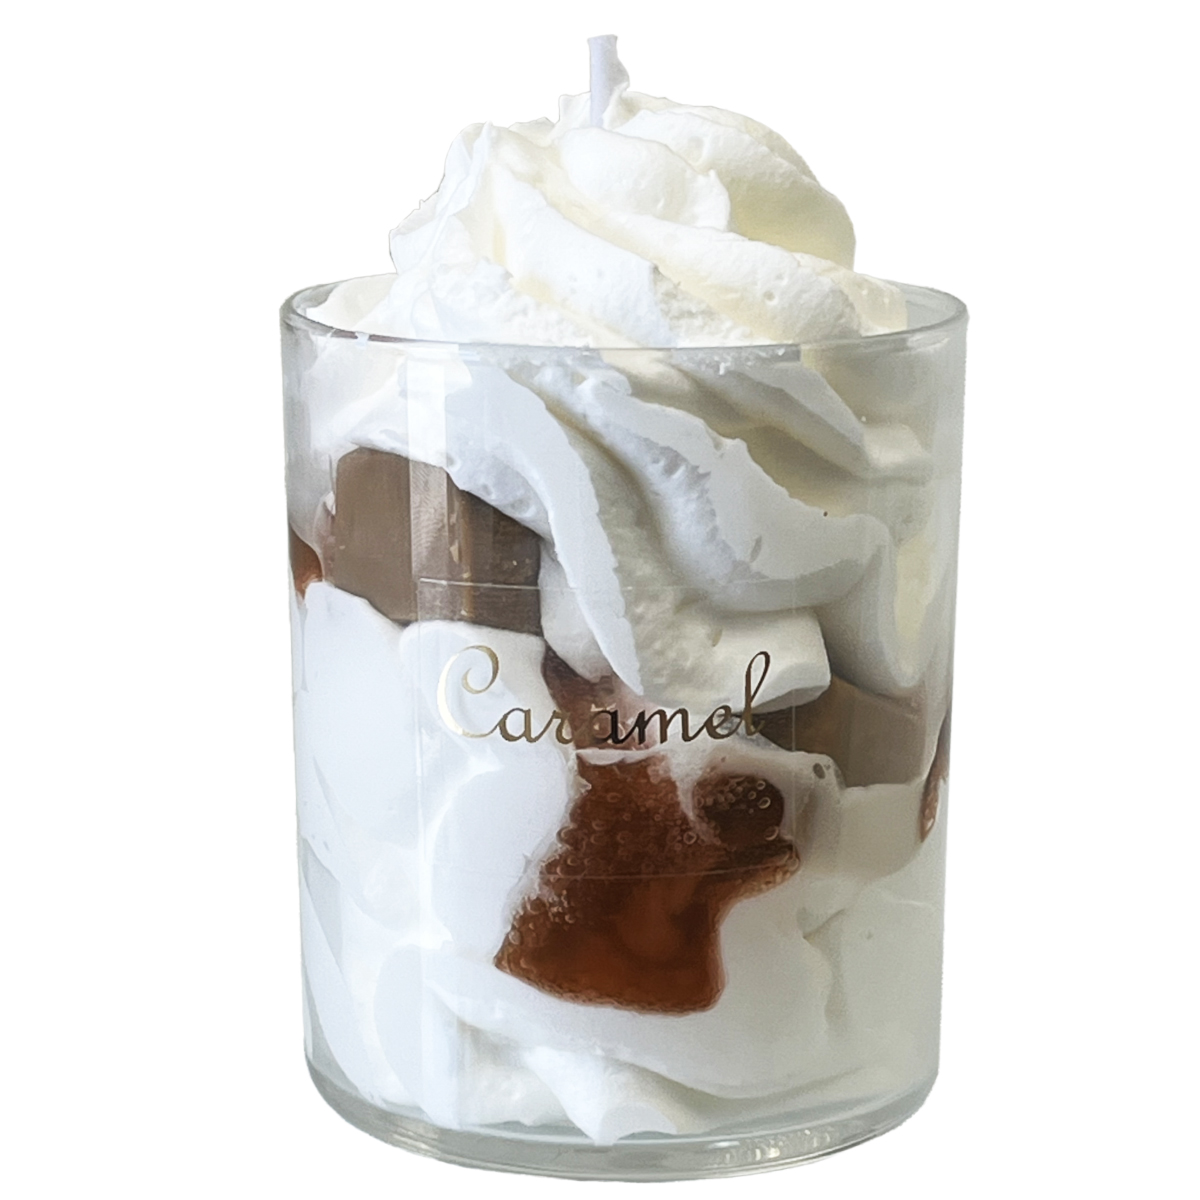 Caramel treat scented candle - Handmade